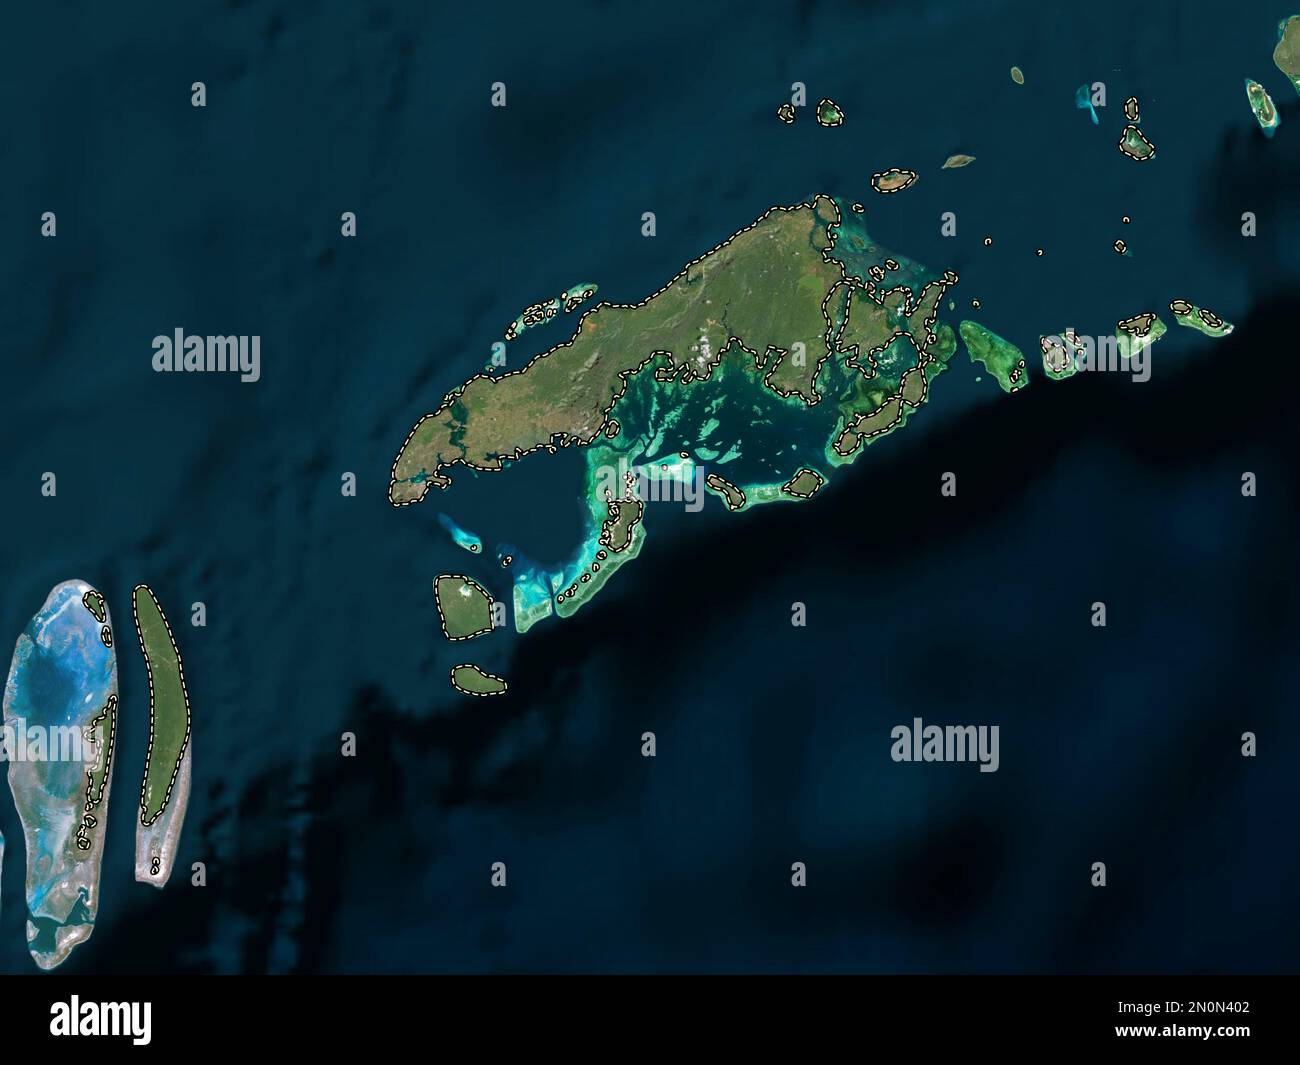 Tawi-Tawi, province of Philippines. Low resolution satellite map Stock Photo